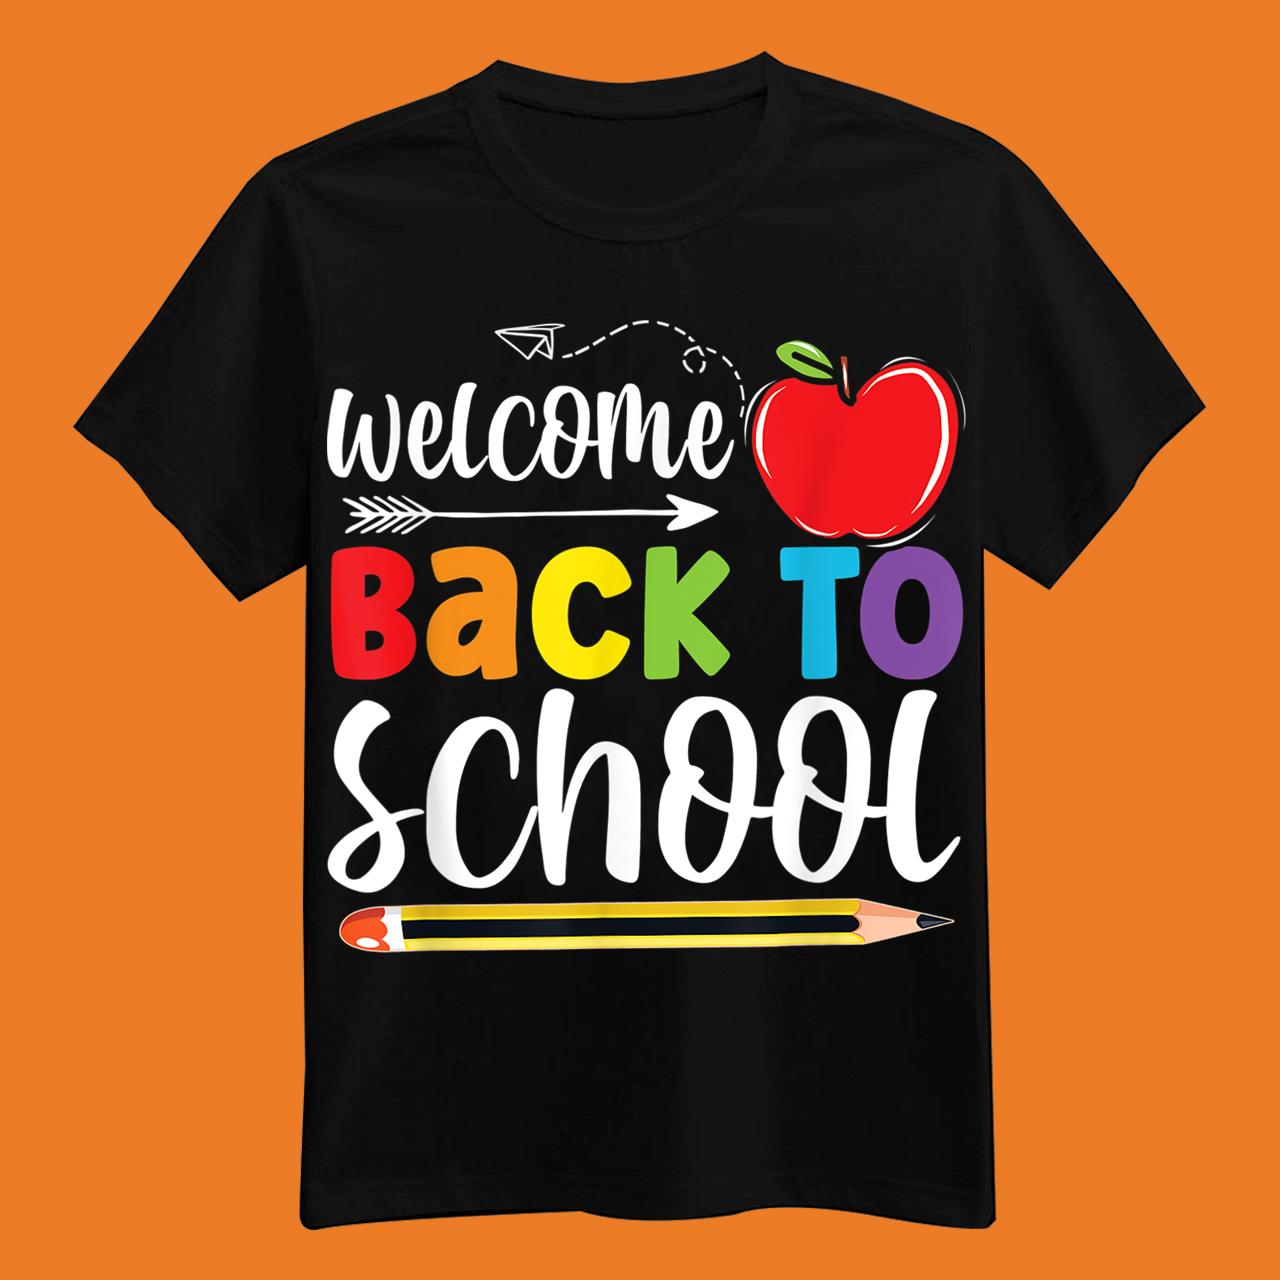 Back To School First Day of School Teachers Students Shirt